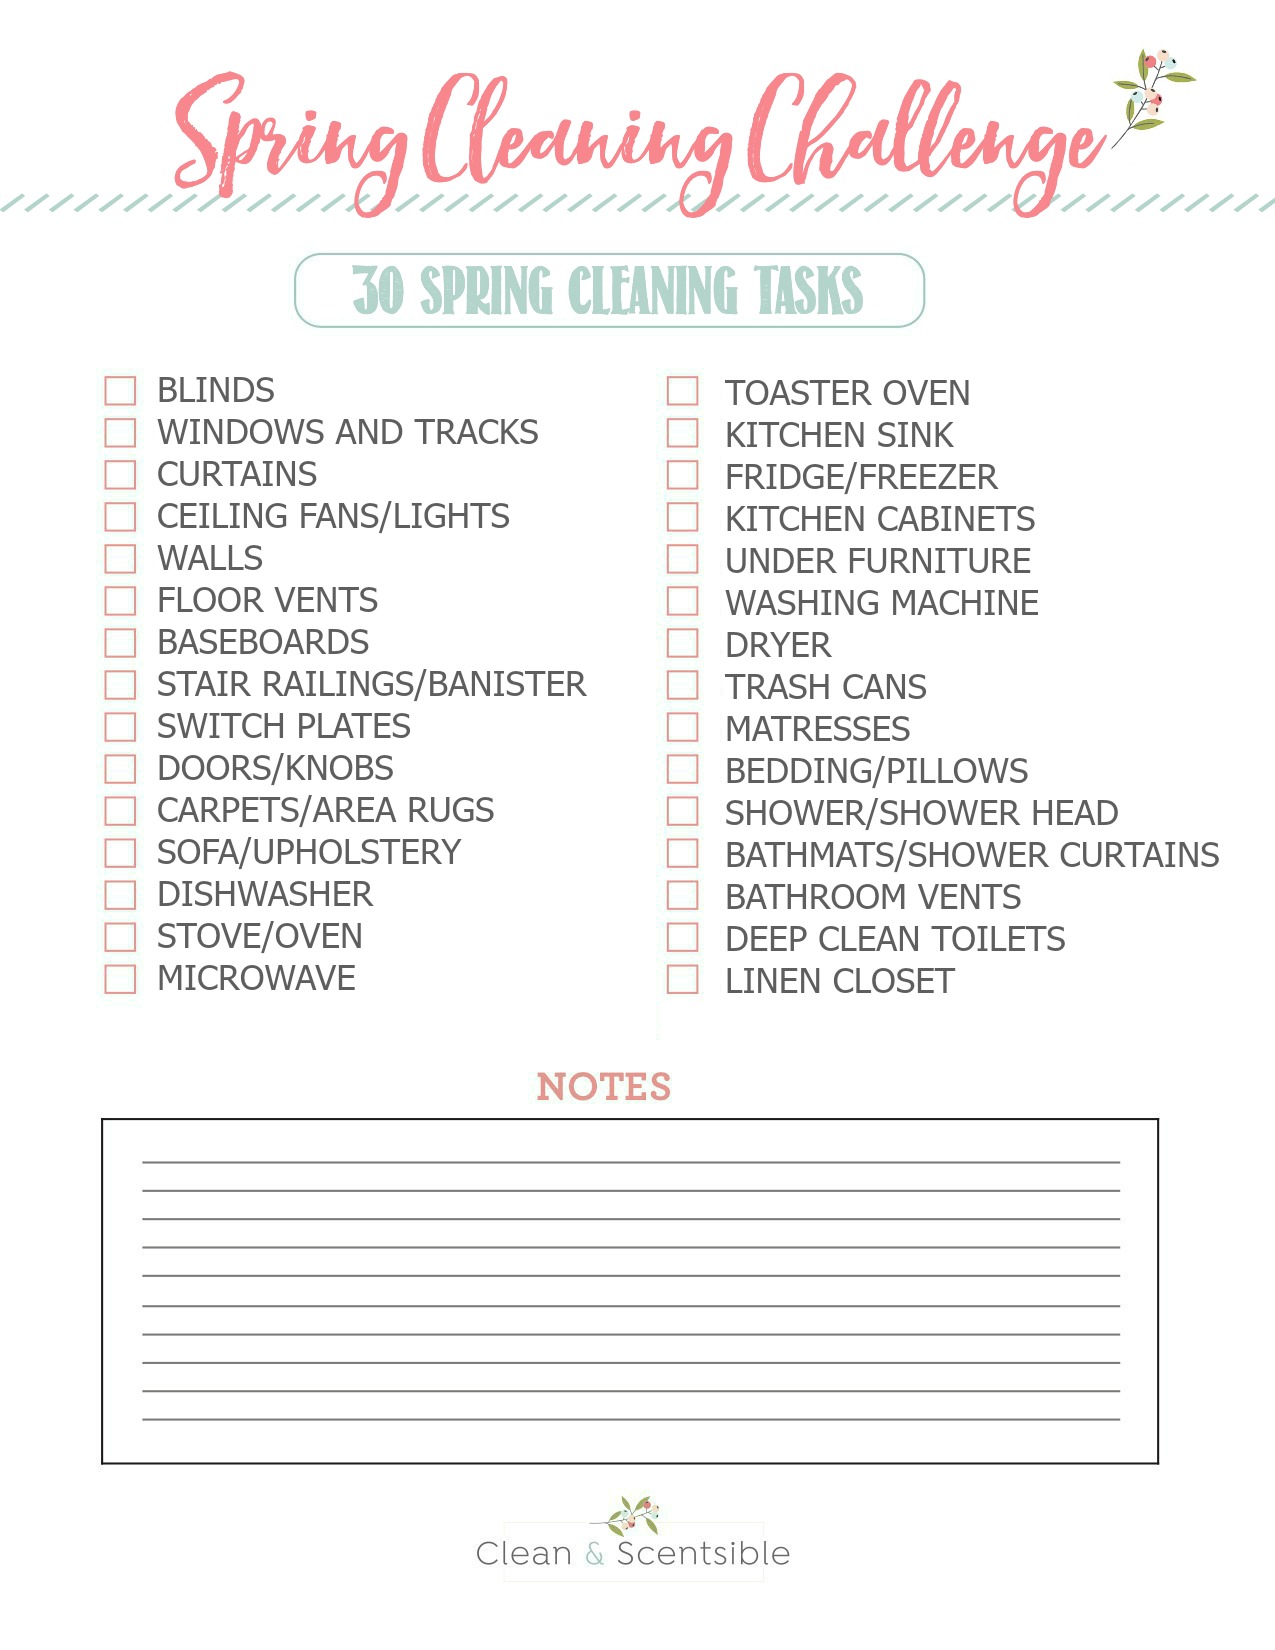 spring cleaning checklist word document